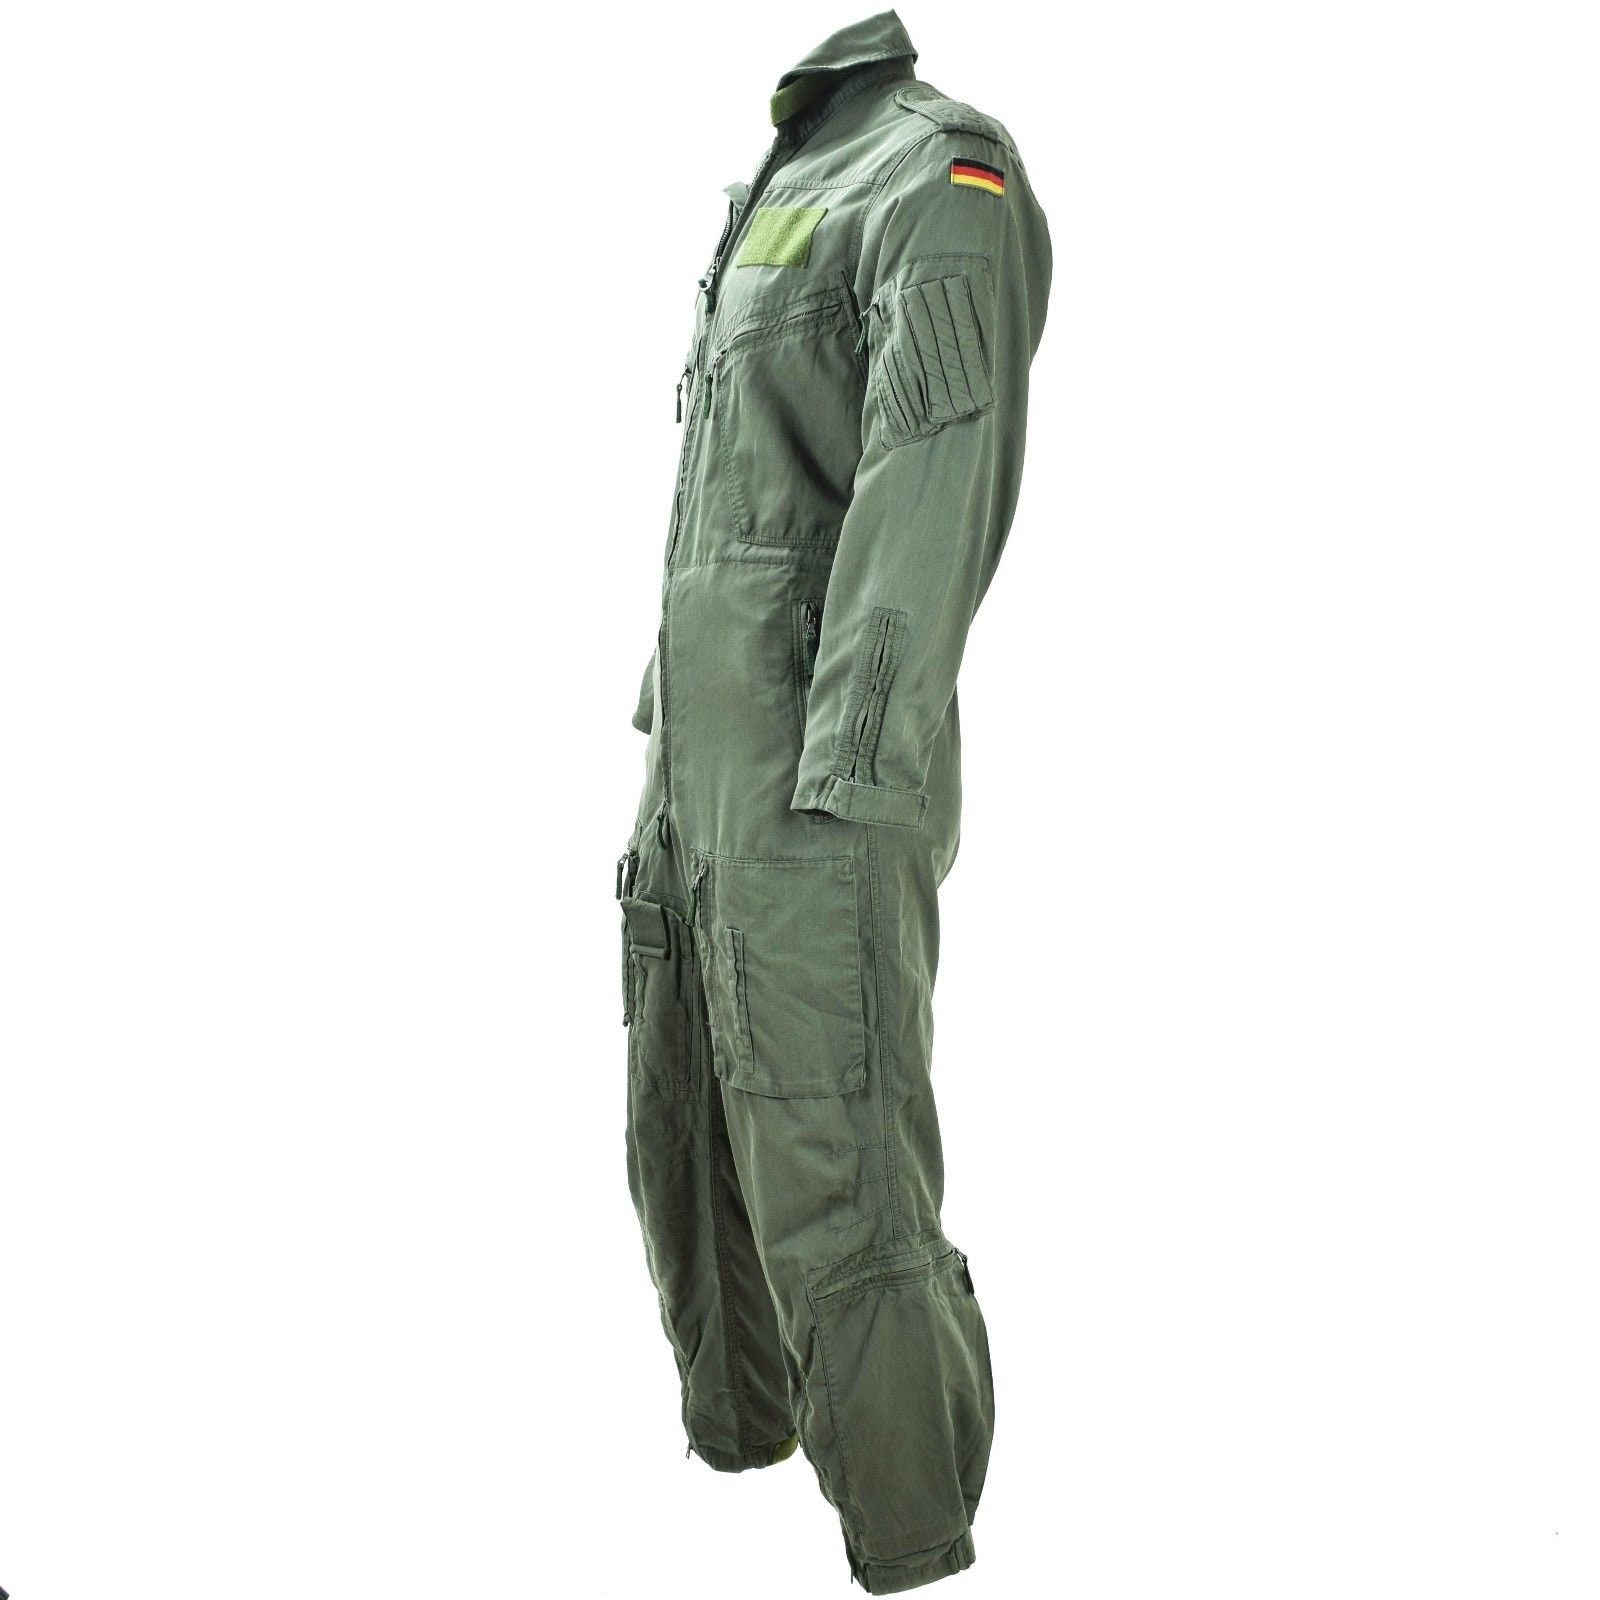 Genuine Austrian army Flight Suit Coverall OD nomex aramid fire resist military 